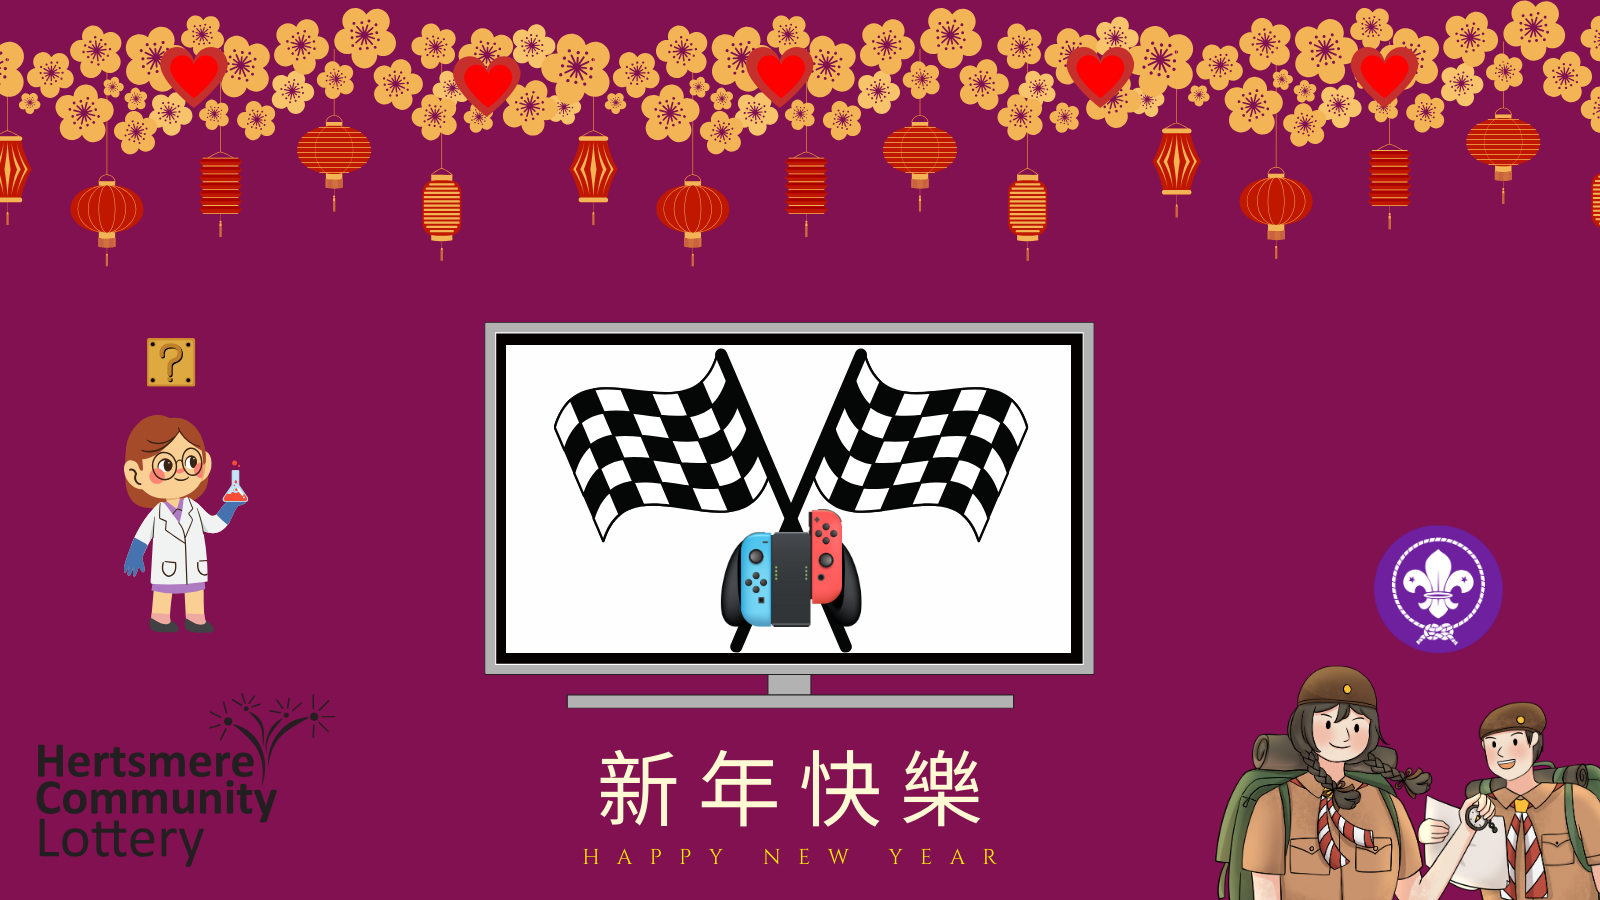 chinese new year lanterns at the top a carton tv in the middle with checkered flags inside with a nintendo switch